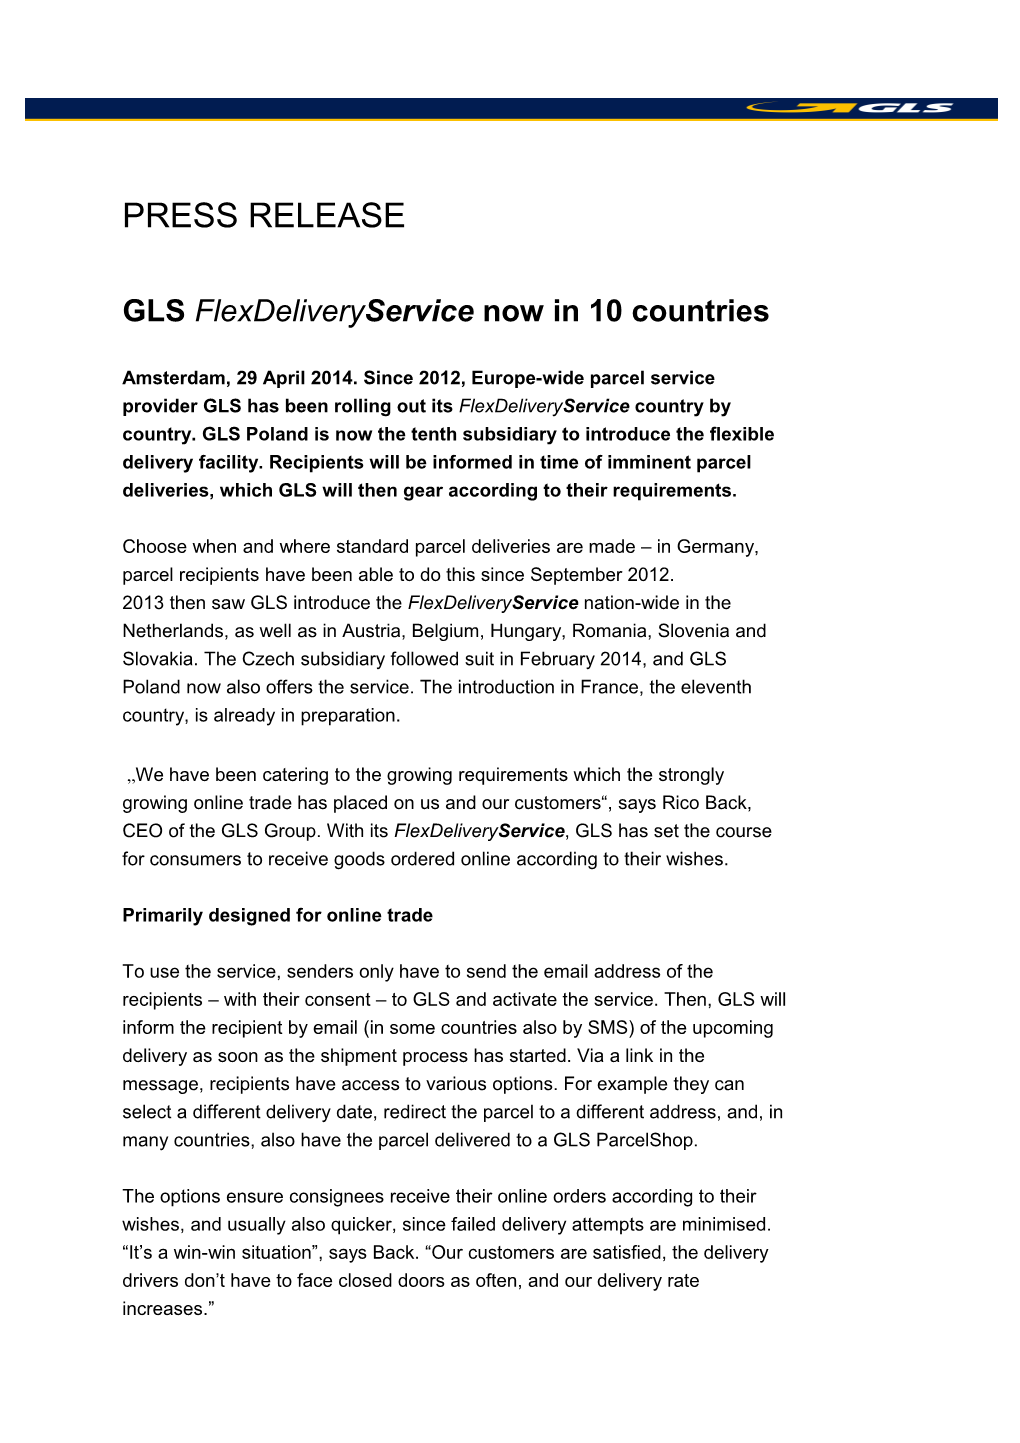 GLS Flexdelivery Service Now in 10 Countries